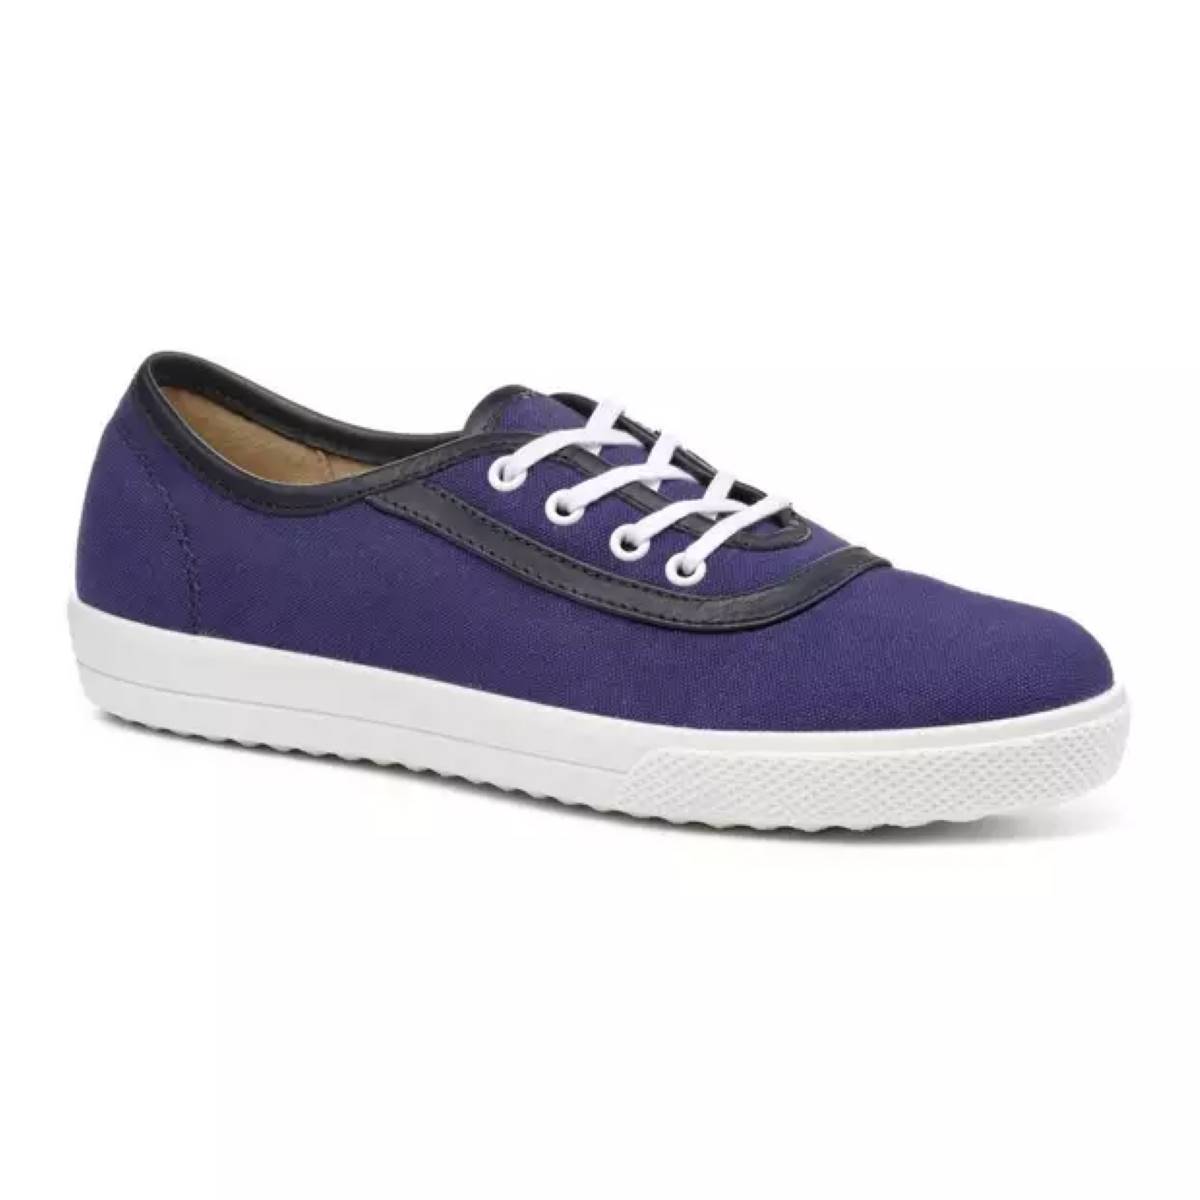 Hotter Mabel Wide Navy Womens trainers 16314-70 in a Plain Canvas in Size 4